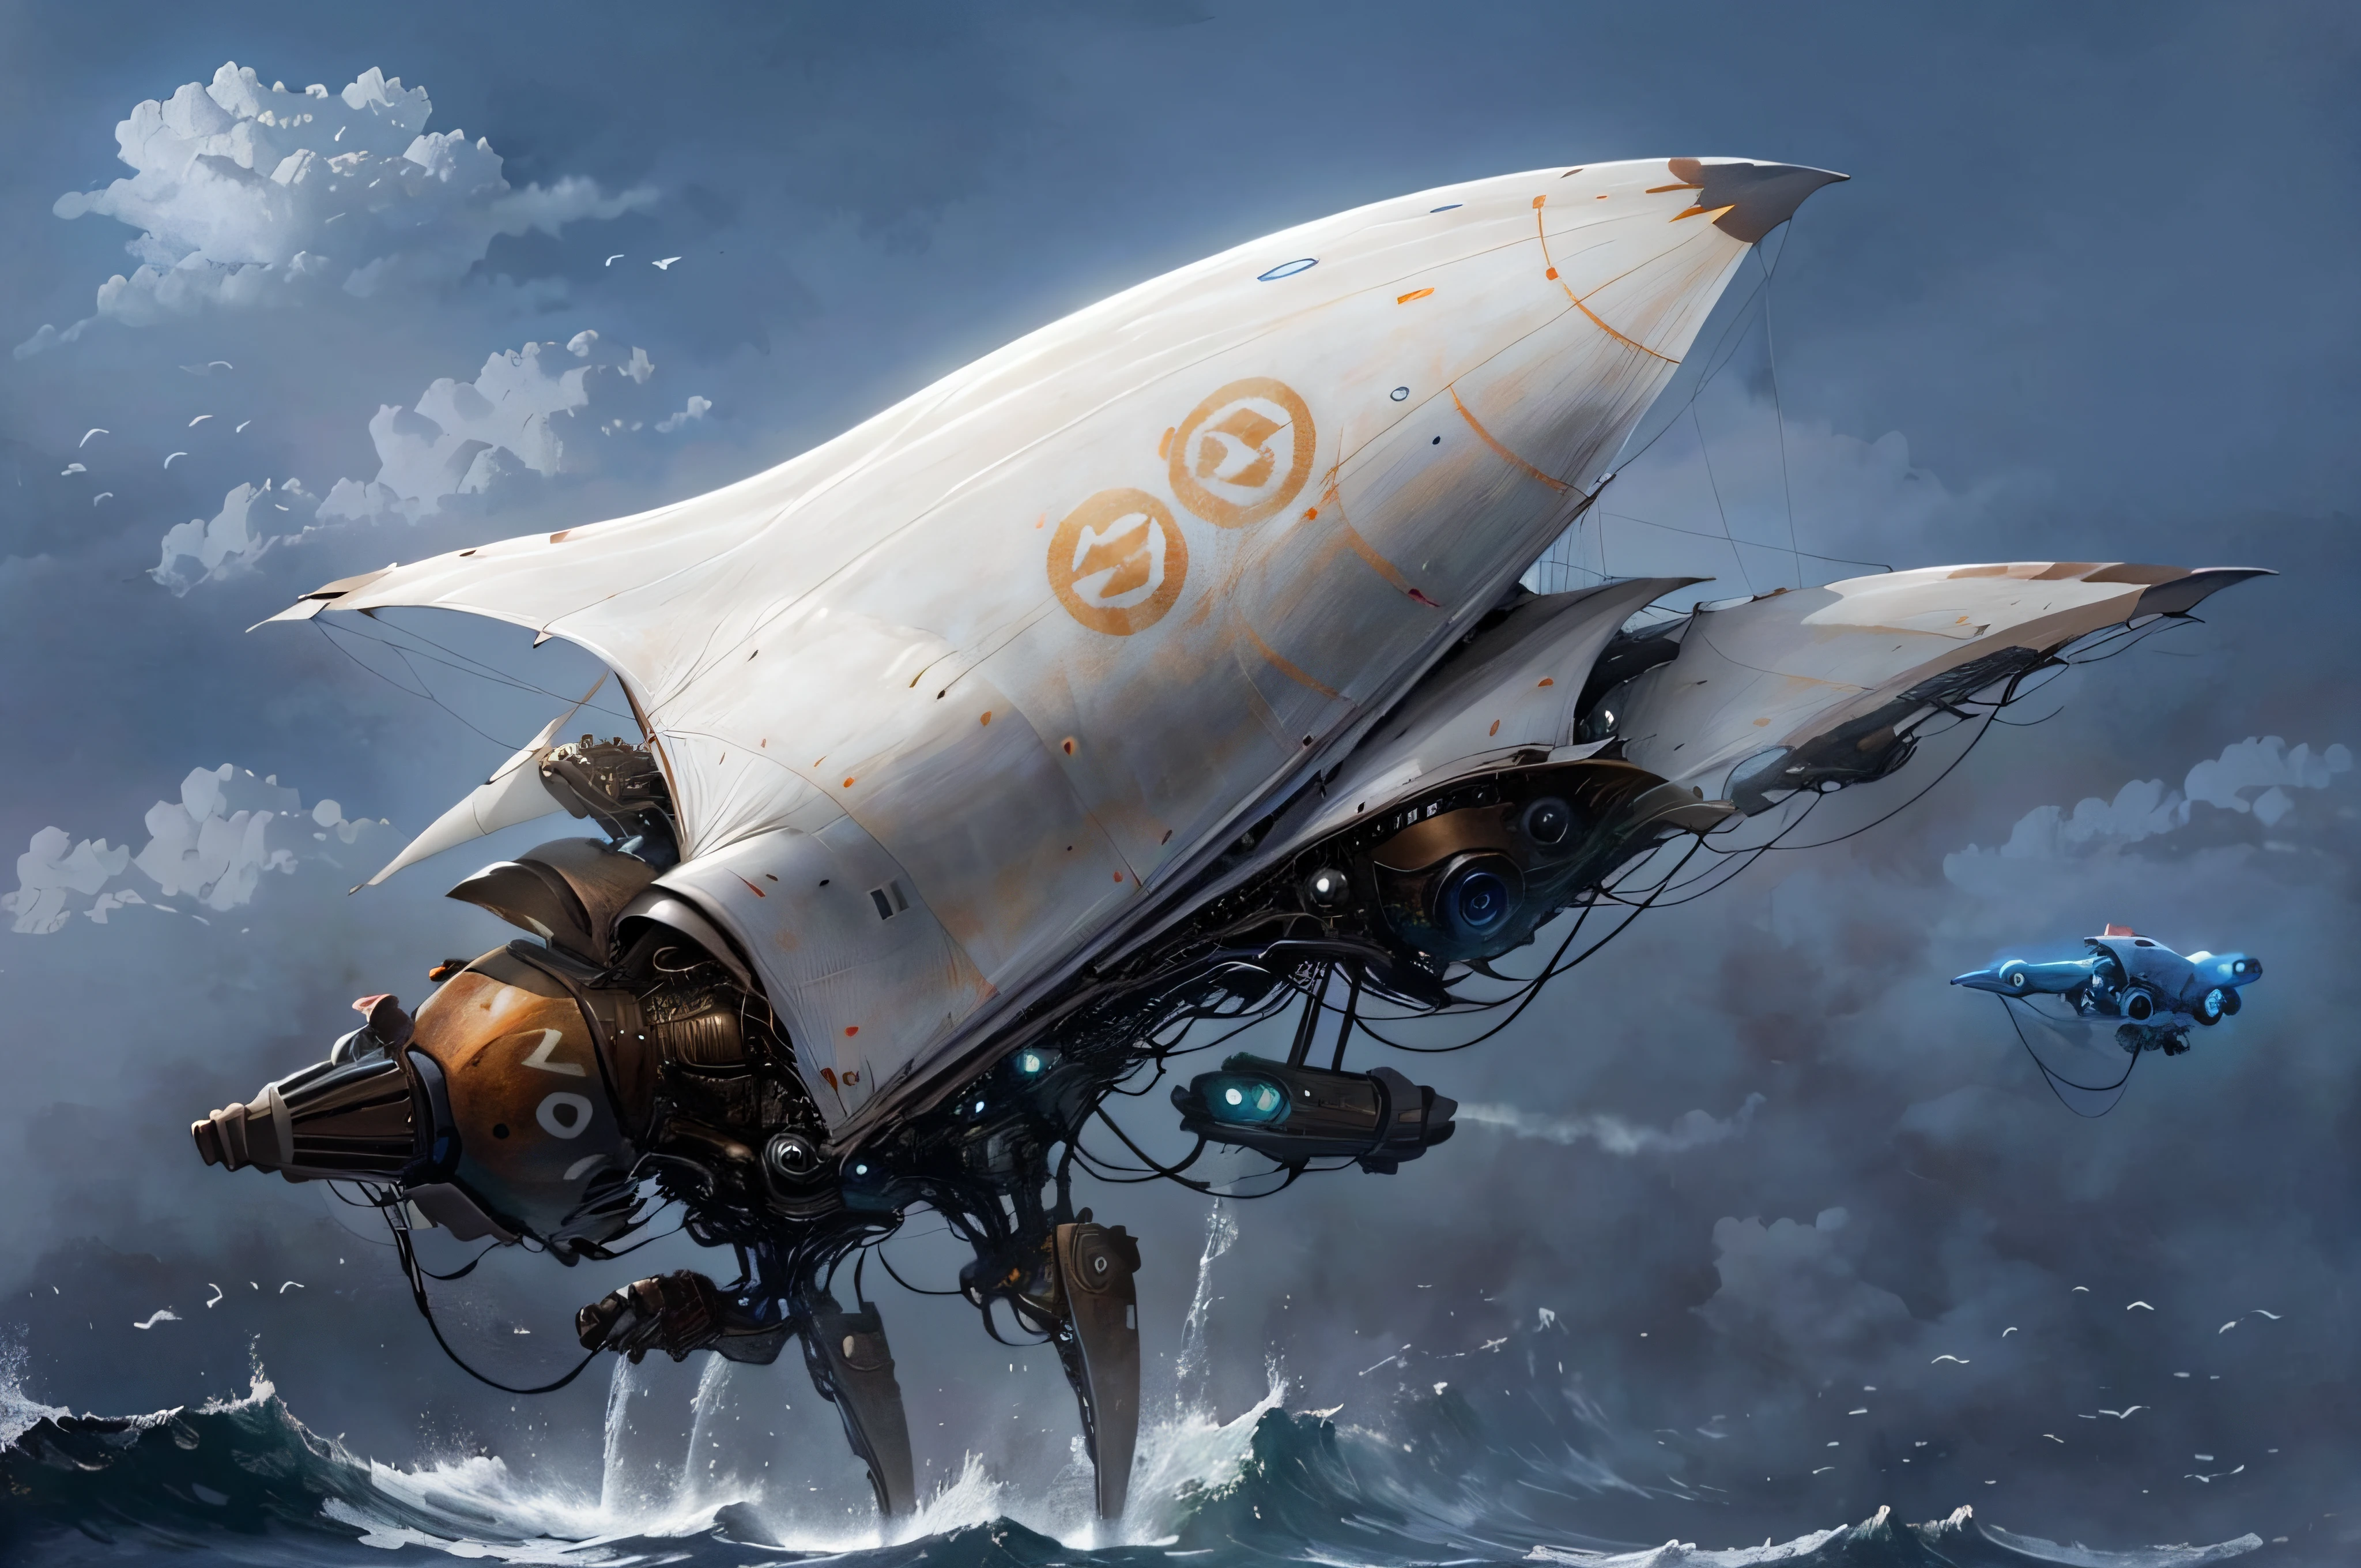 Super Sailboat Boat with big white sails and white hull flying among clouds and seagulls, down in the very rough sea with huge giant waves trying to catch the ship